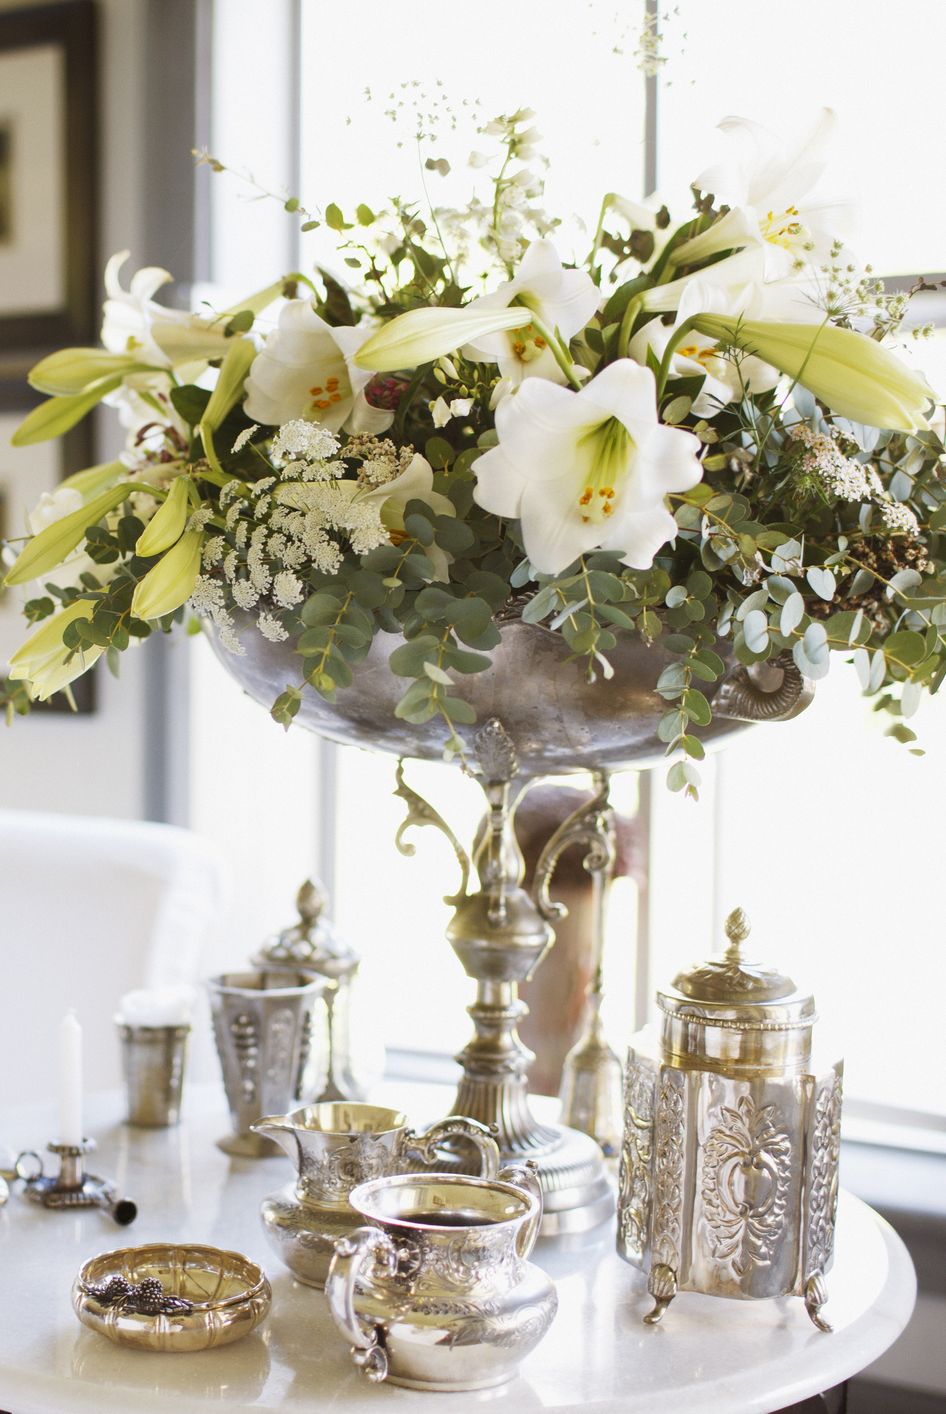 a vase with white flowers on a table